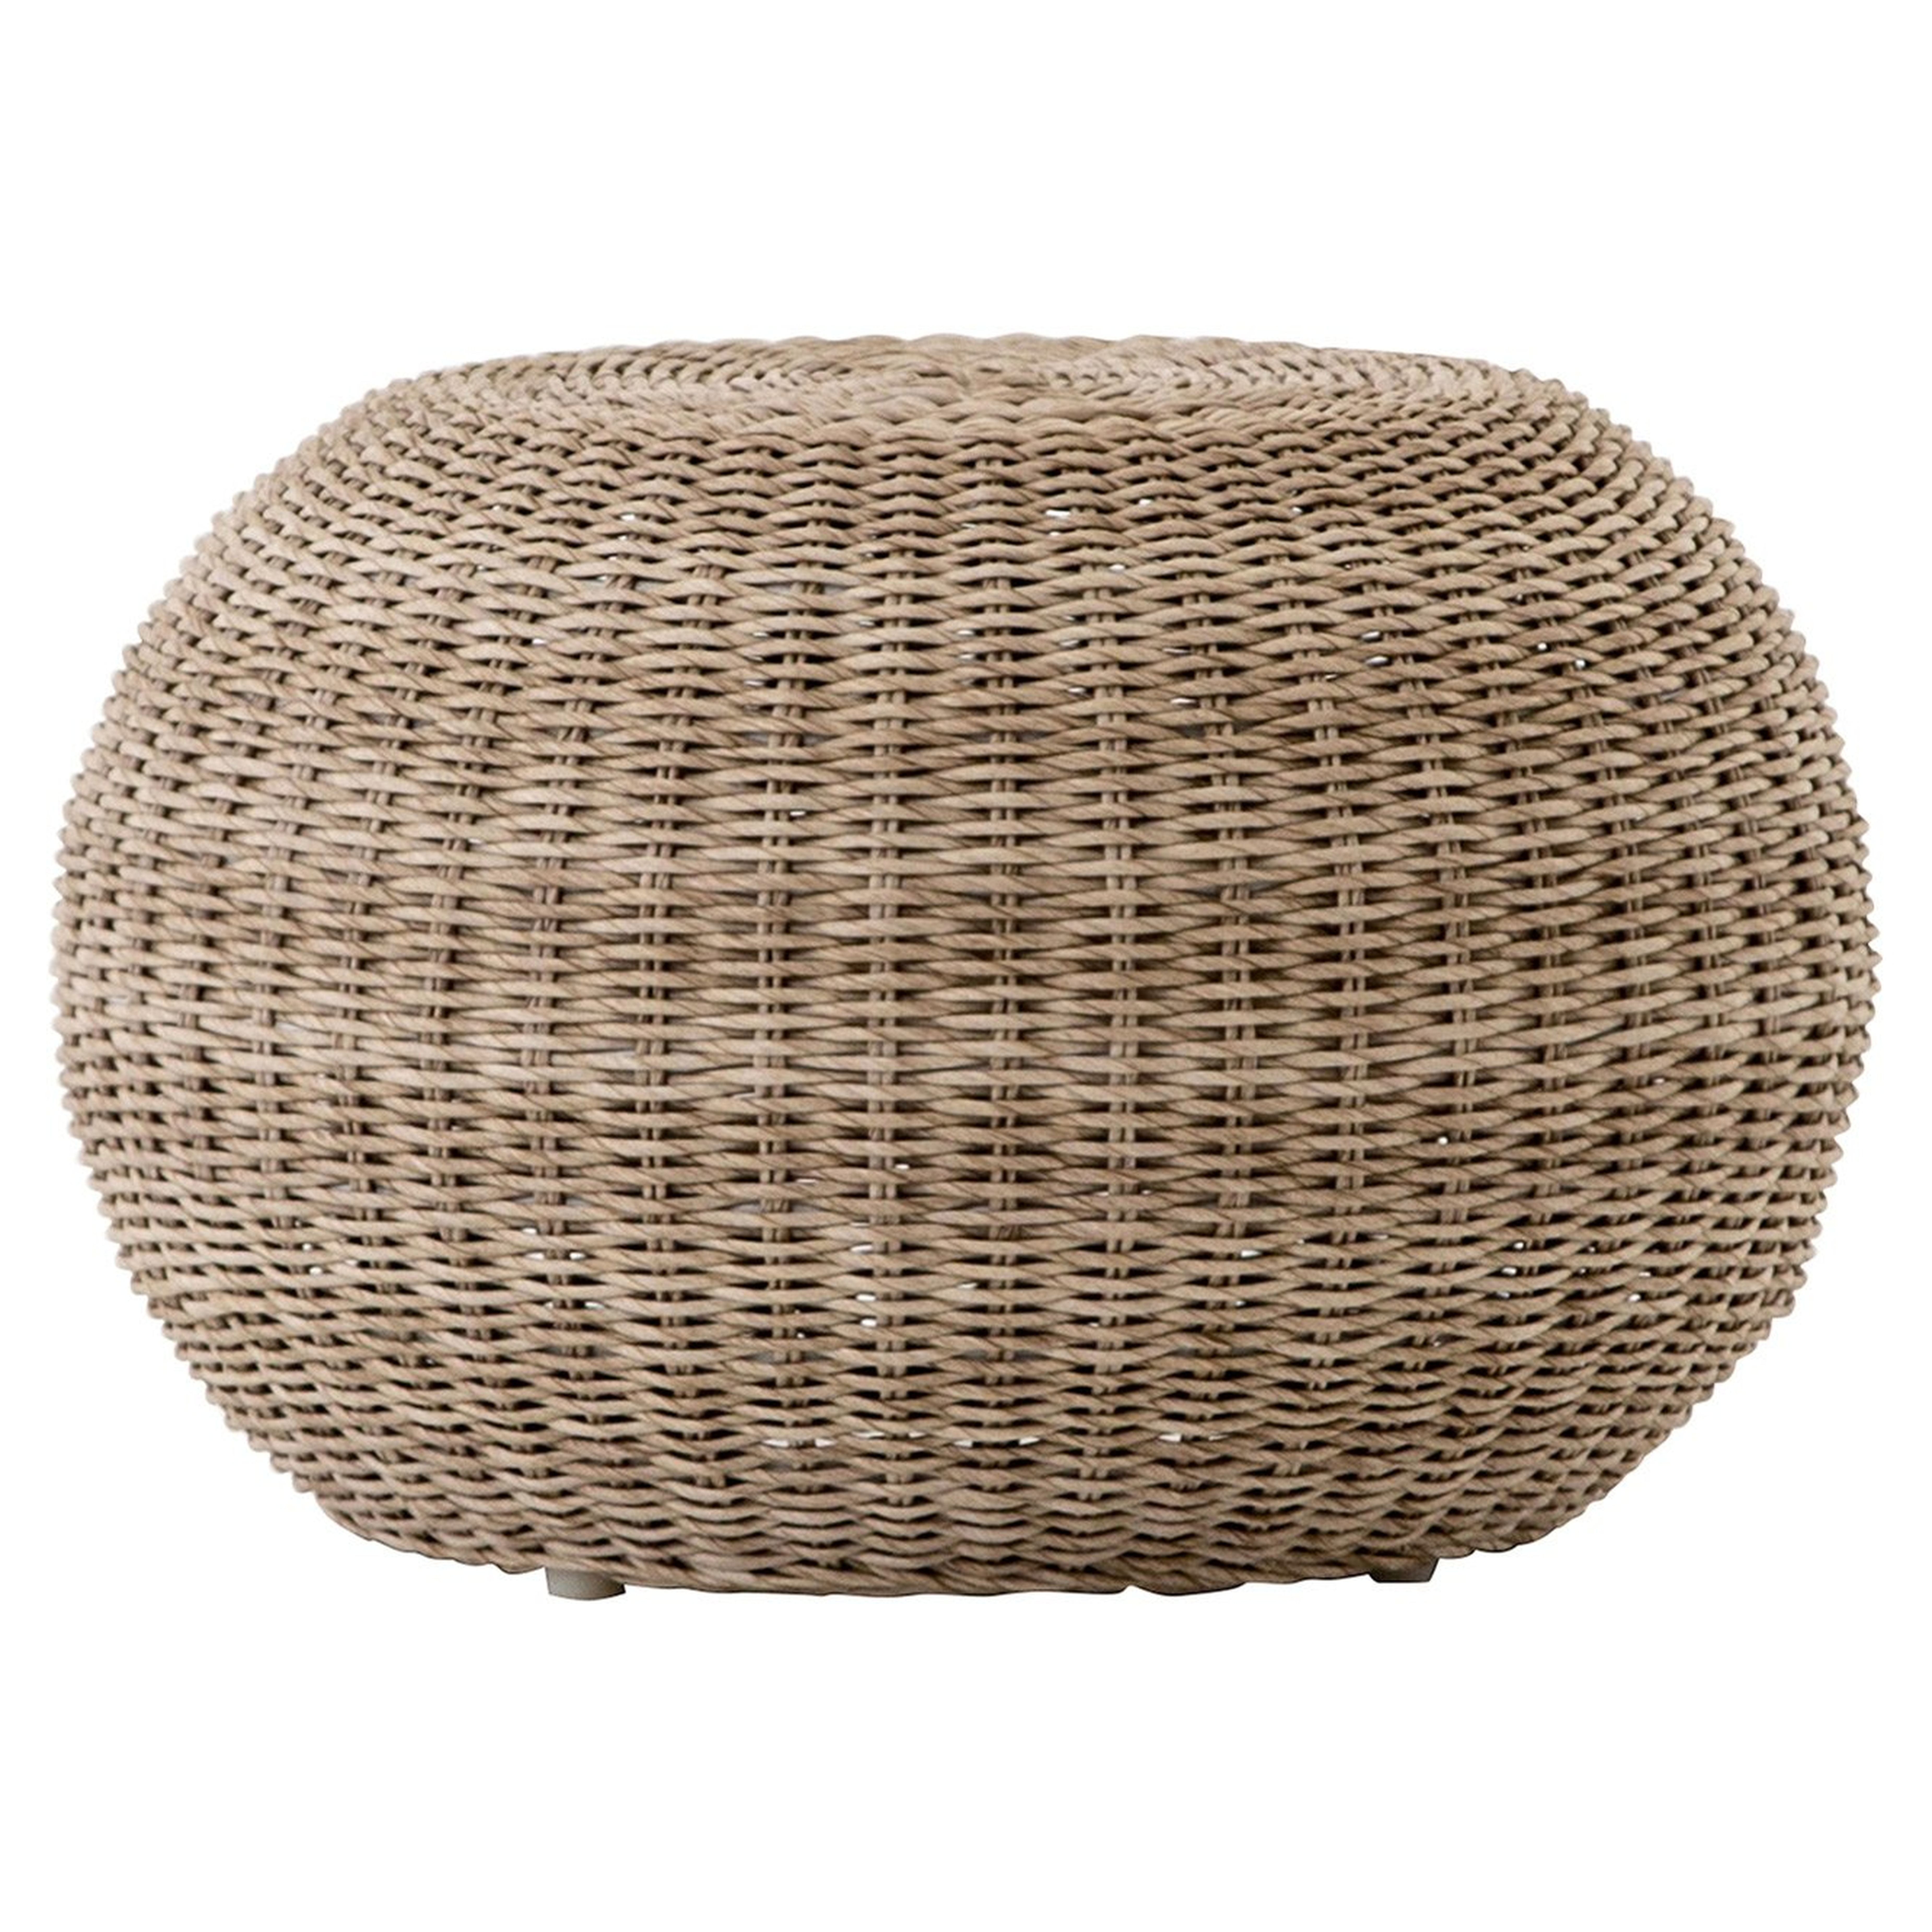 Airah Modern Classic Brown Rounded Woven Wicker Outdoor Accent Stool - Kathy Kuo Home